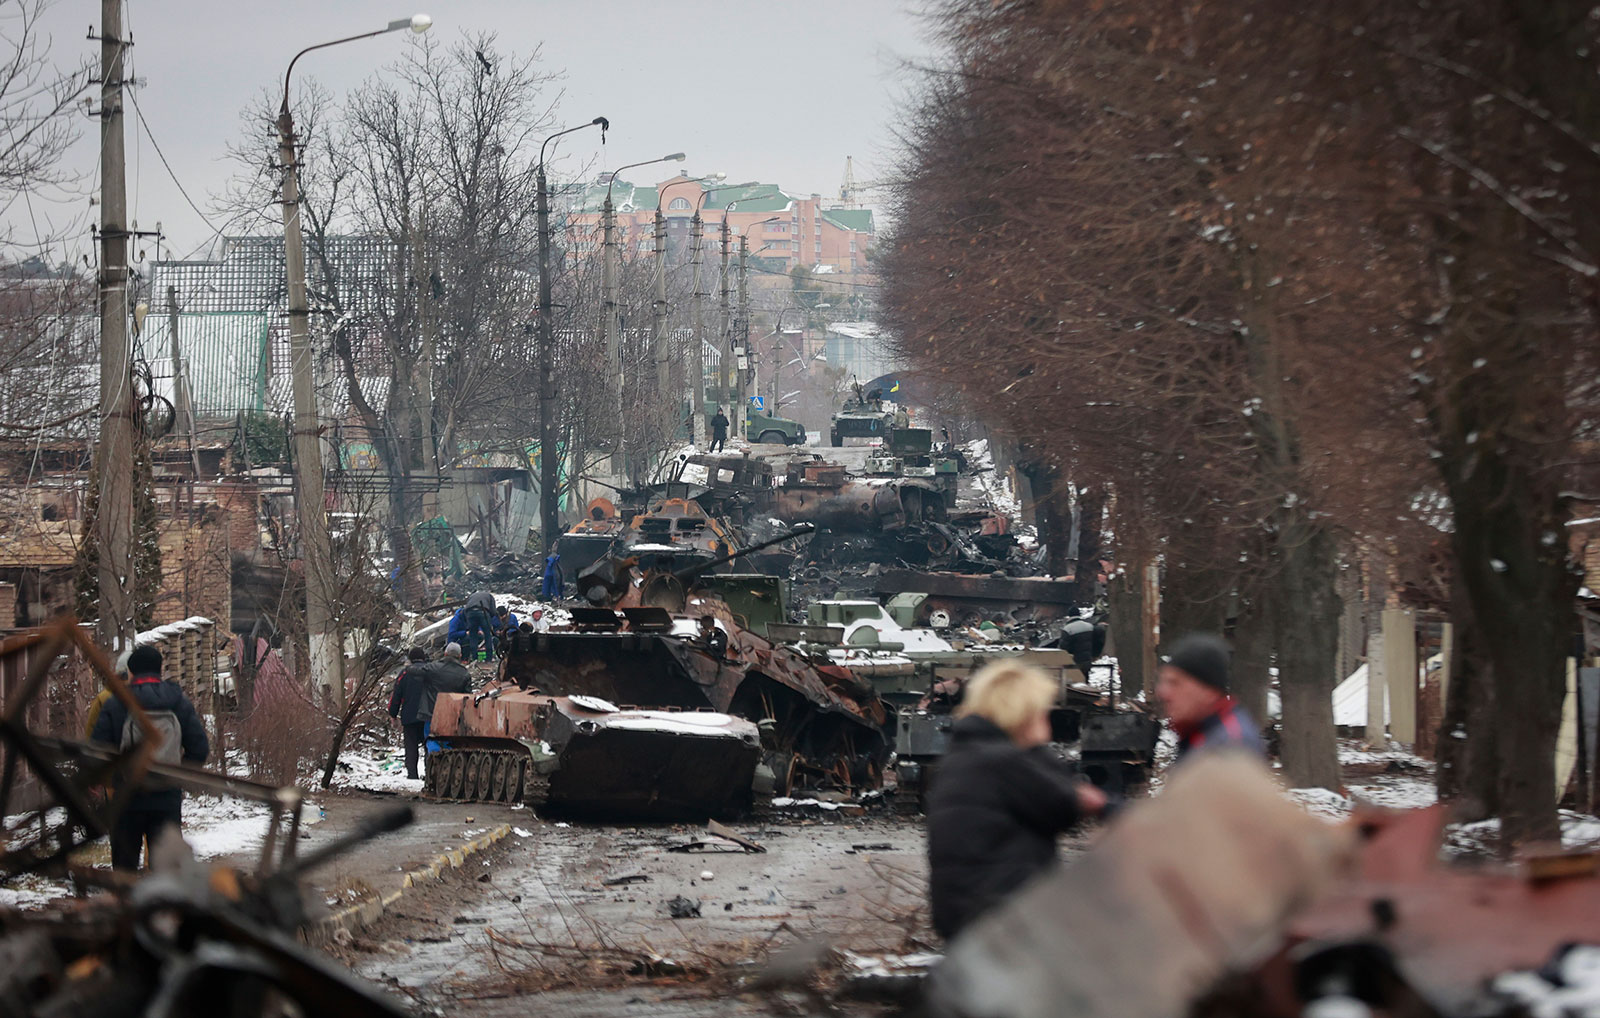 The remains of Russian military vehicles line a road in Bucha, Ukraine, on March 1.